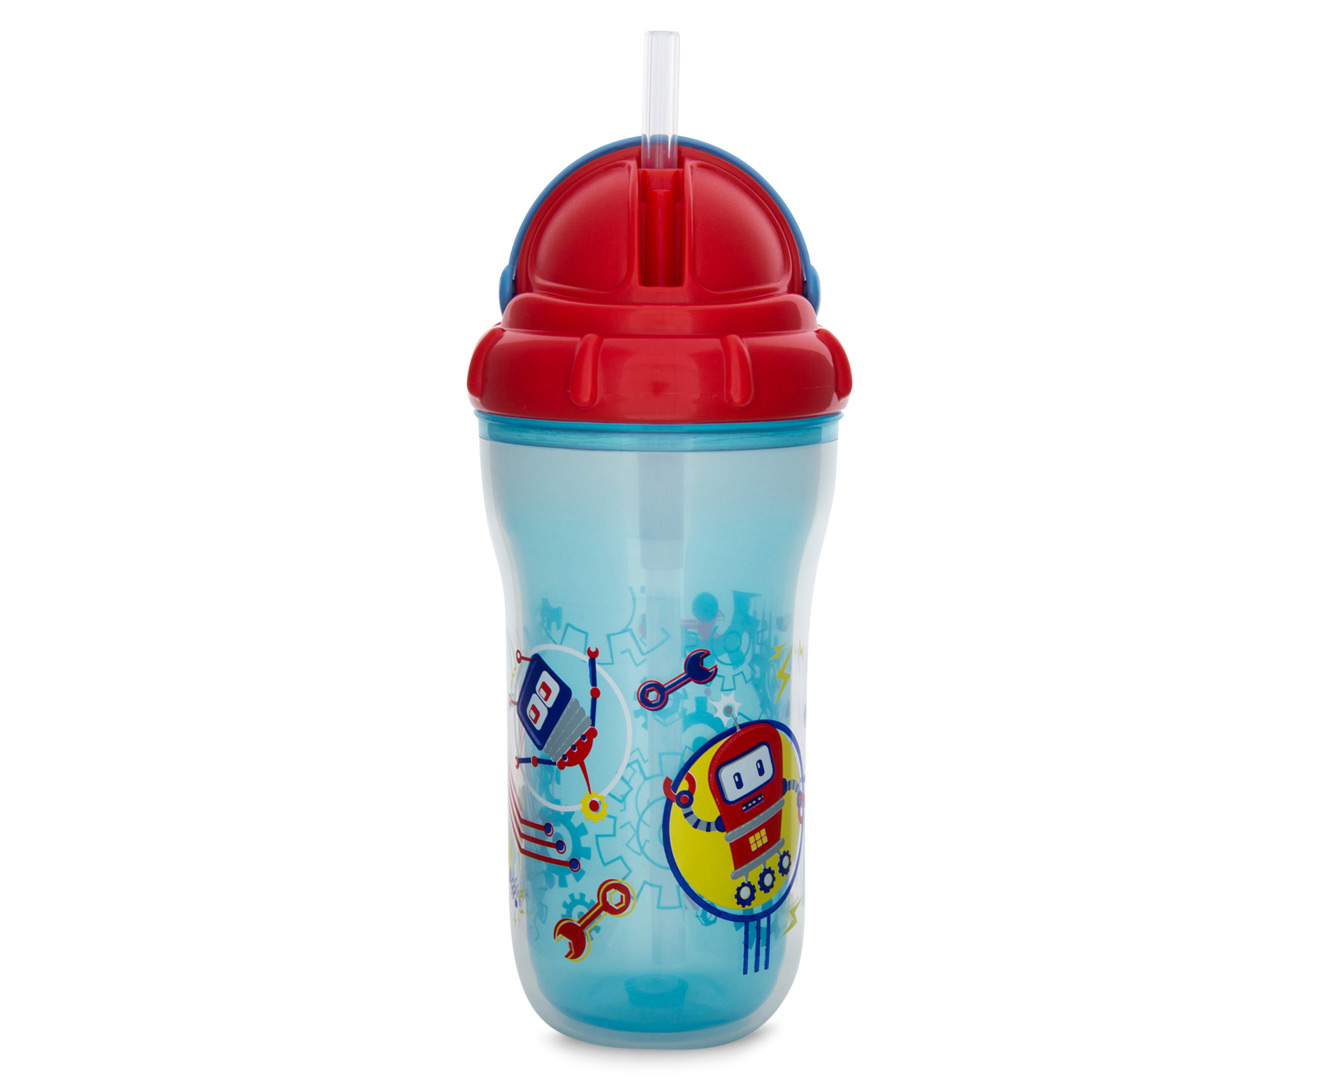 Nuby Insulated No-Spill Flip-It Cup - Blue/Red